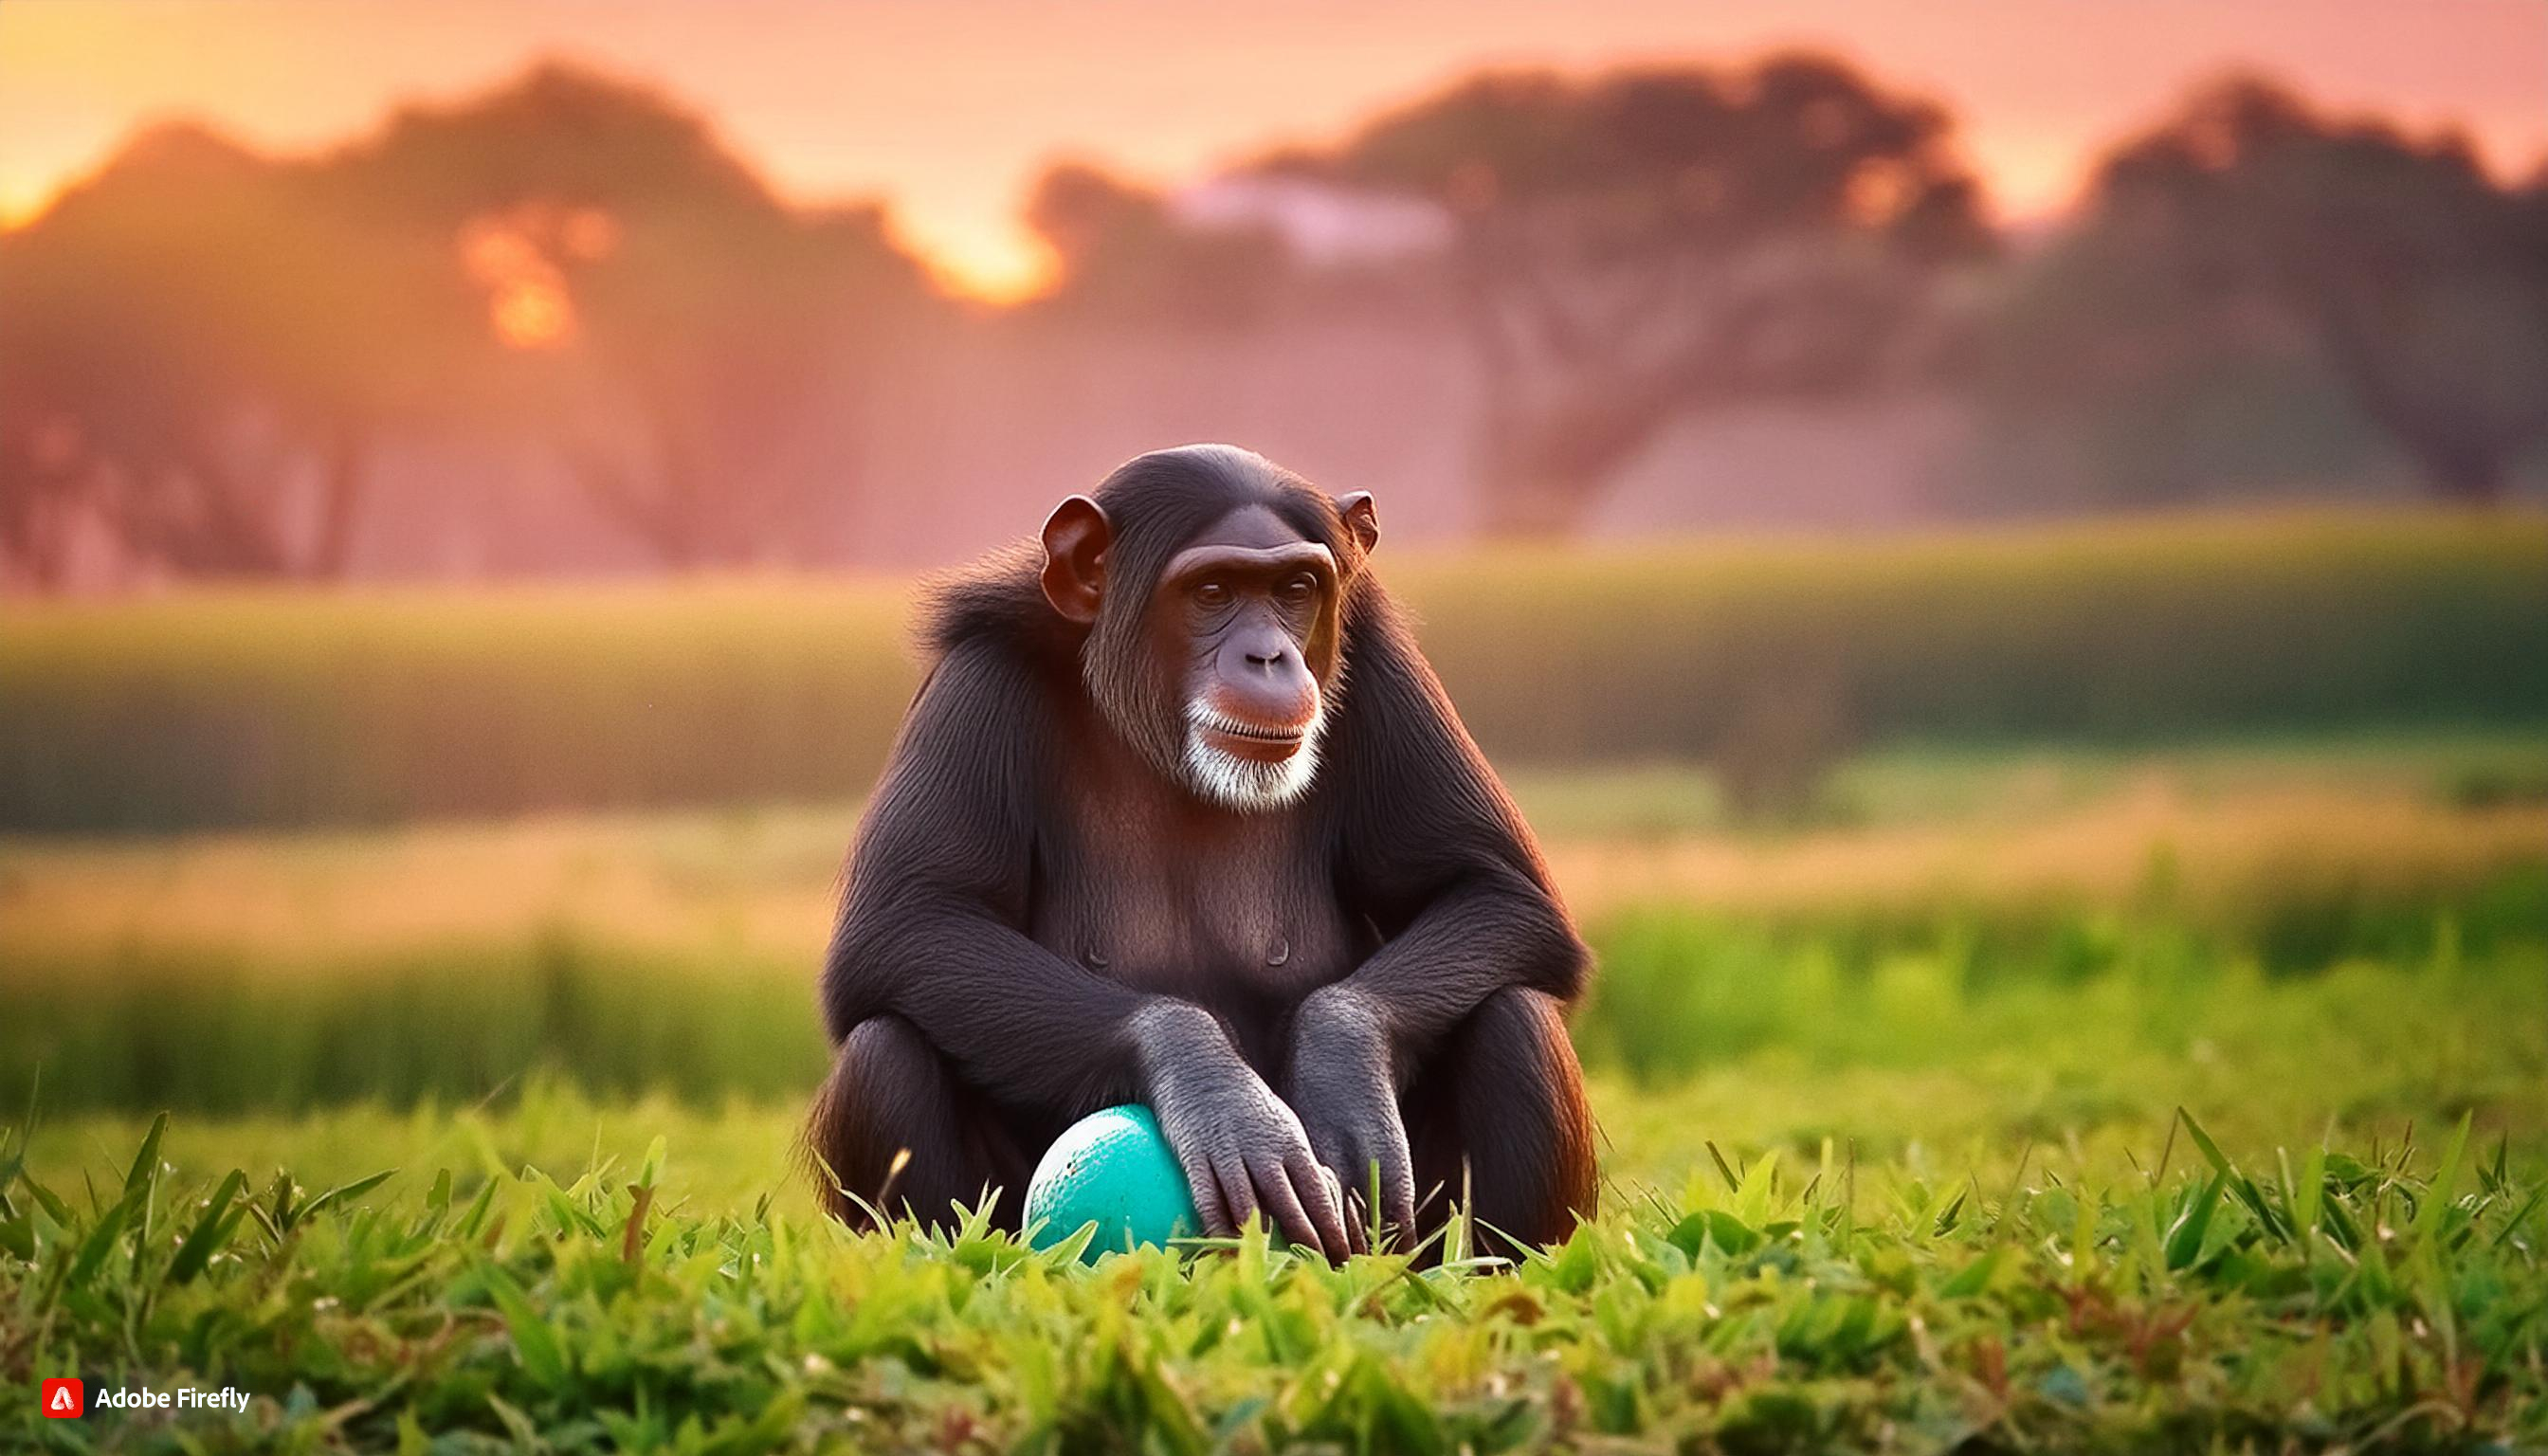 Firefly Create for me a picture of a chimpanzee monkey playing in the daylight ball, the backg...jpg